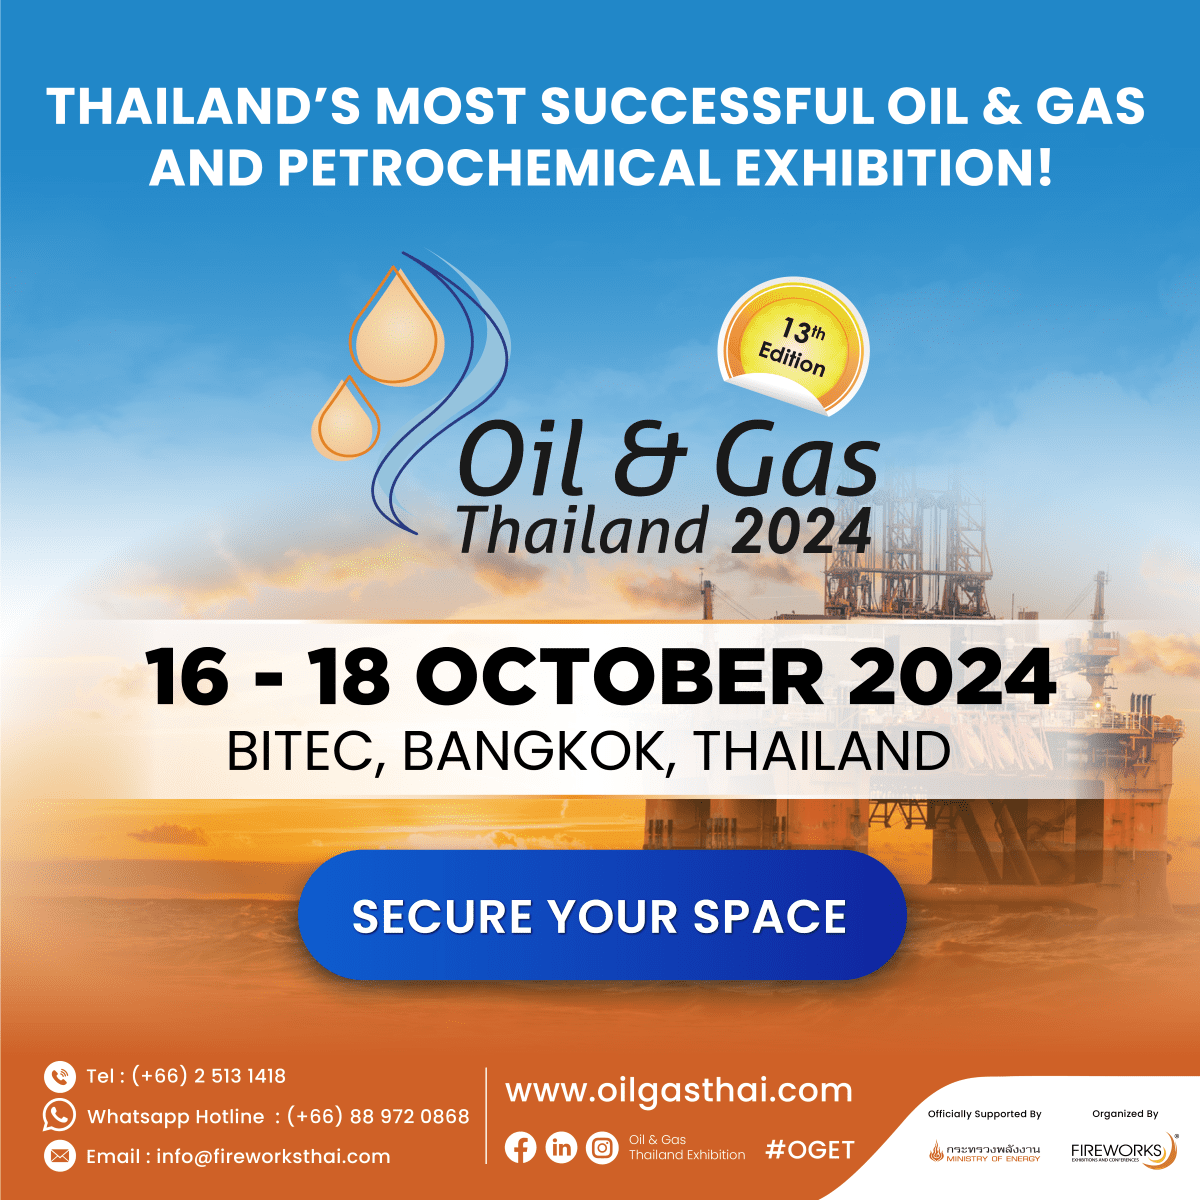 13th Edition of Oil & Gas Thailand (OGET) 2024